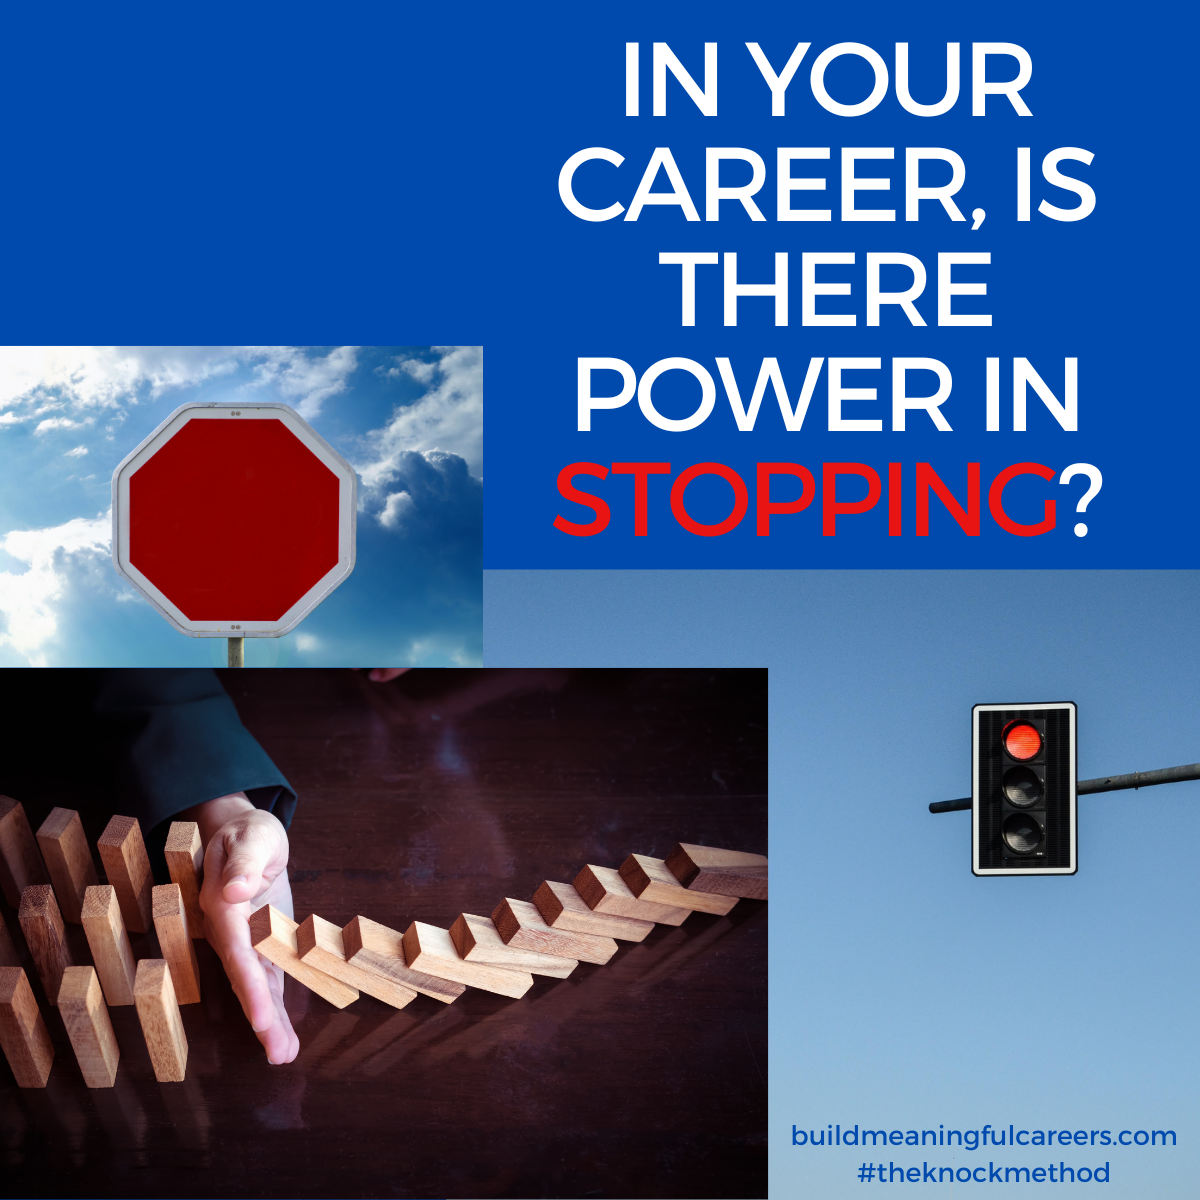 In Your Career, is there Power in Stopping?